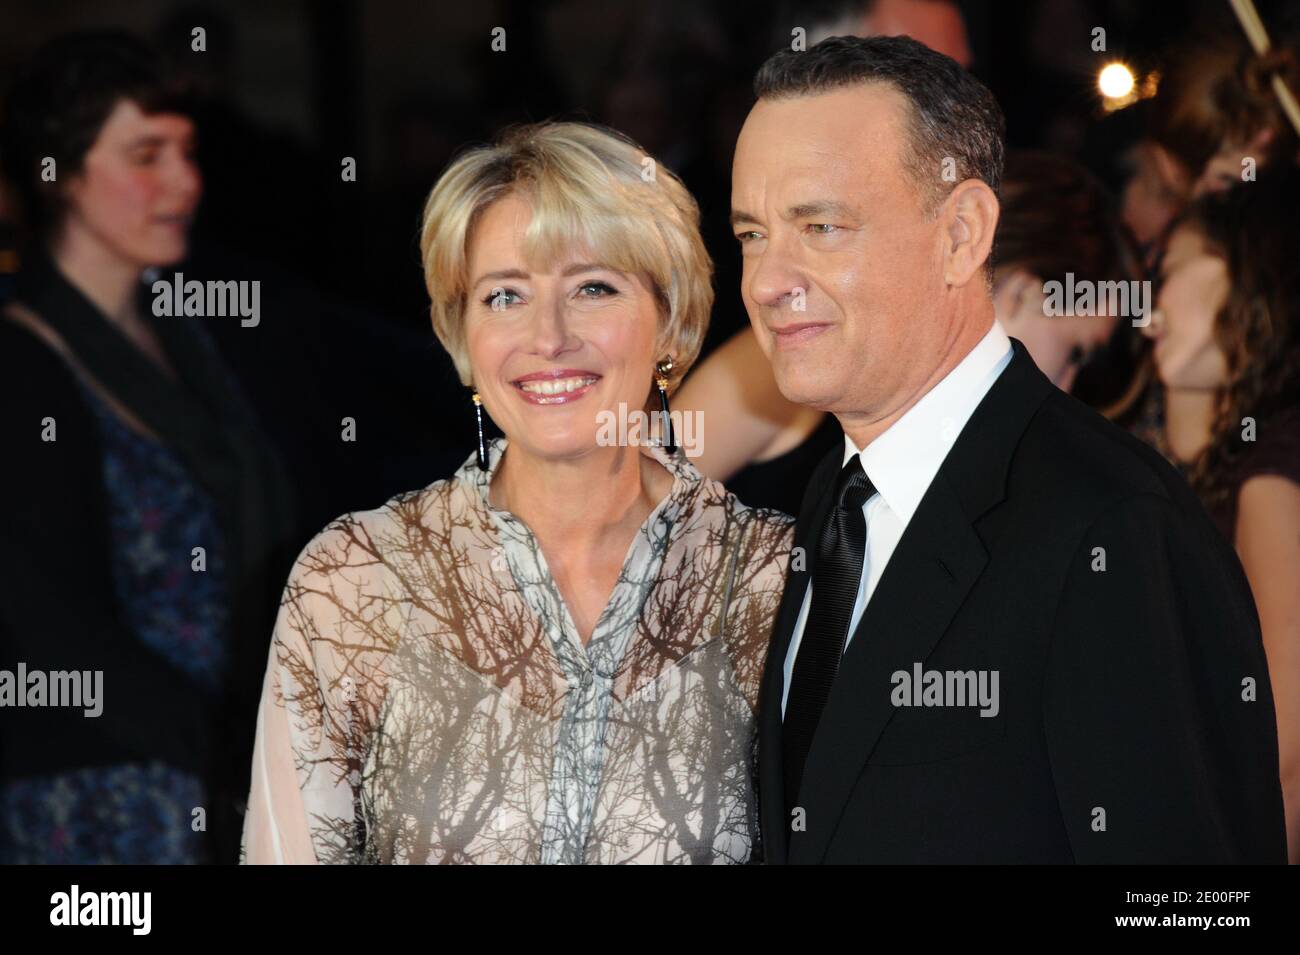 Emma Thompson and Tom Hanks attending the screening of 'Saving Mr Banks'  and the Closing Ceremony of the 57th BFI London Film Festival at Odeon  Leicester Square in London, UK on October